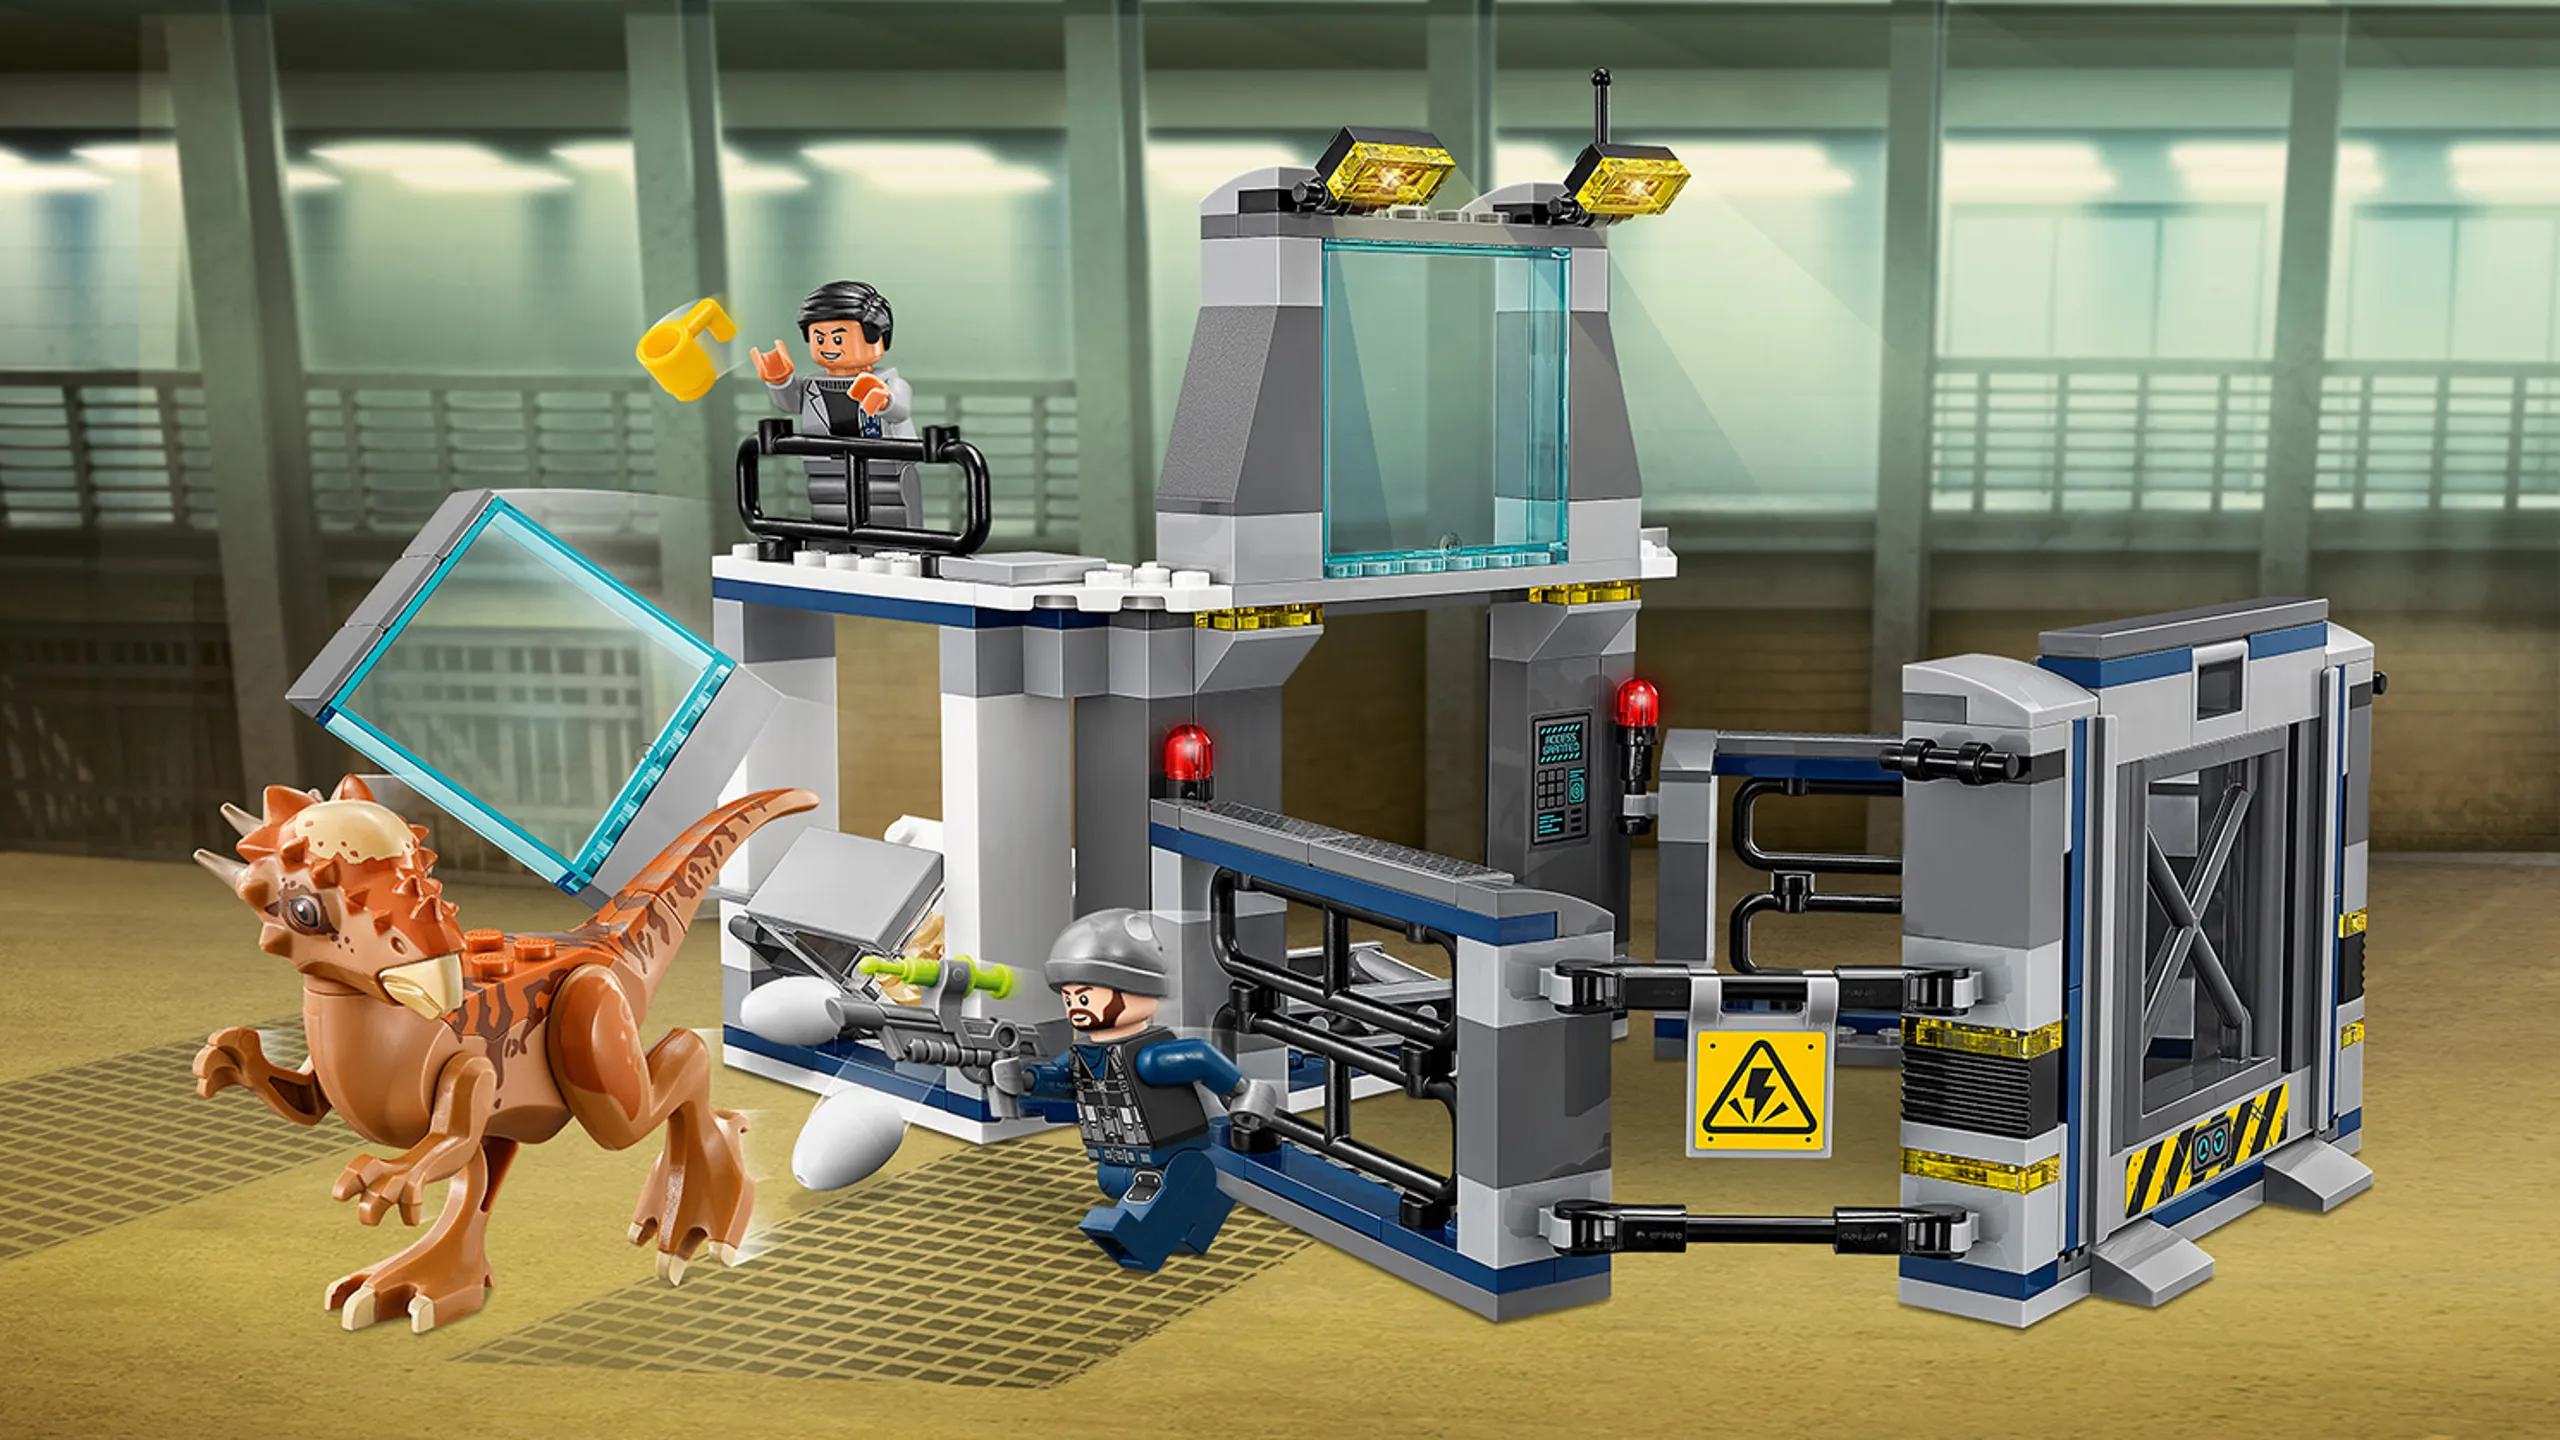 LEGO Jurassic World - 75927 Stygimoloch Breakout - The dinosaur is breaking out from the enclosure the scientists have made with a big fence.